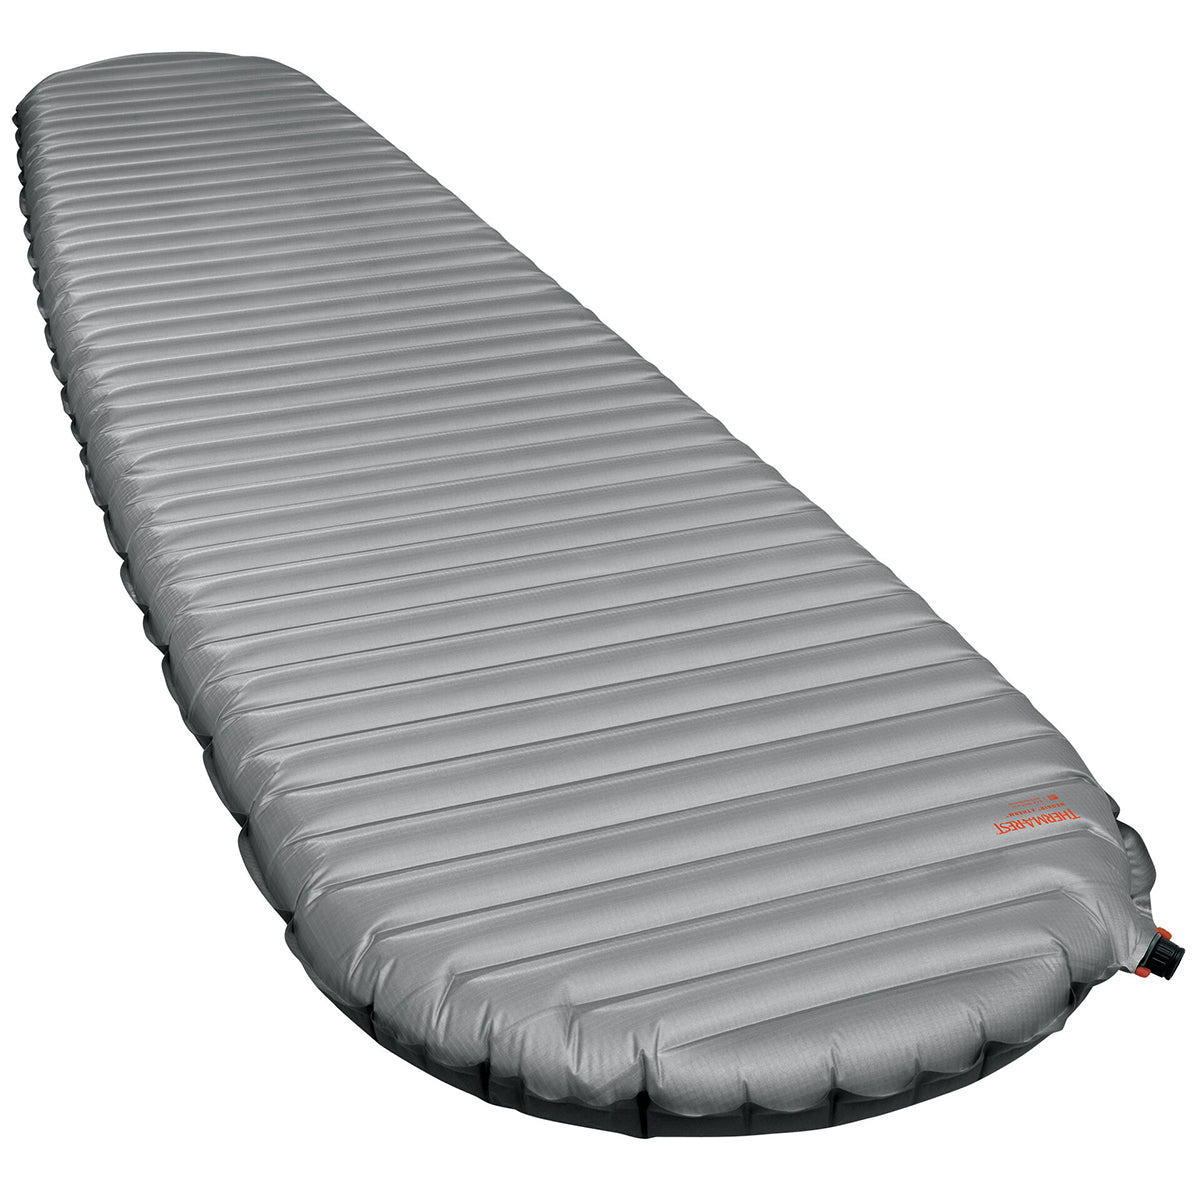 Therm-A-Rest NeoAir Xtherm Sleeping Pad in Therm-A-Rest NeoAir Xtherm Sleeping Pad - goHUNT Shop by GOHUNT | Thermarest - GOHUNT Shop